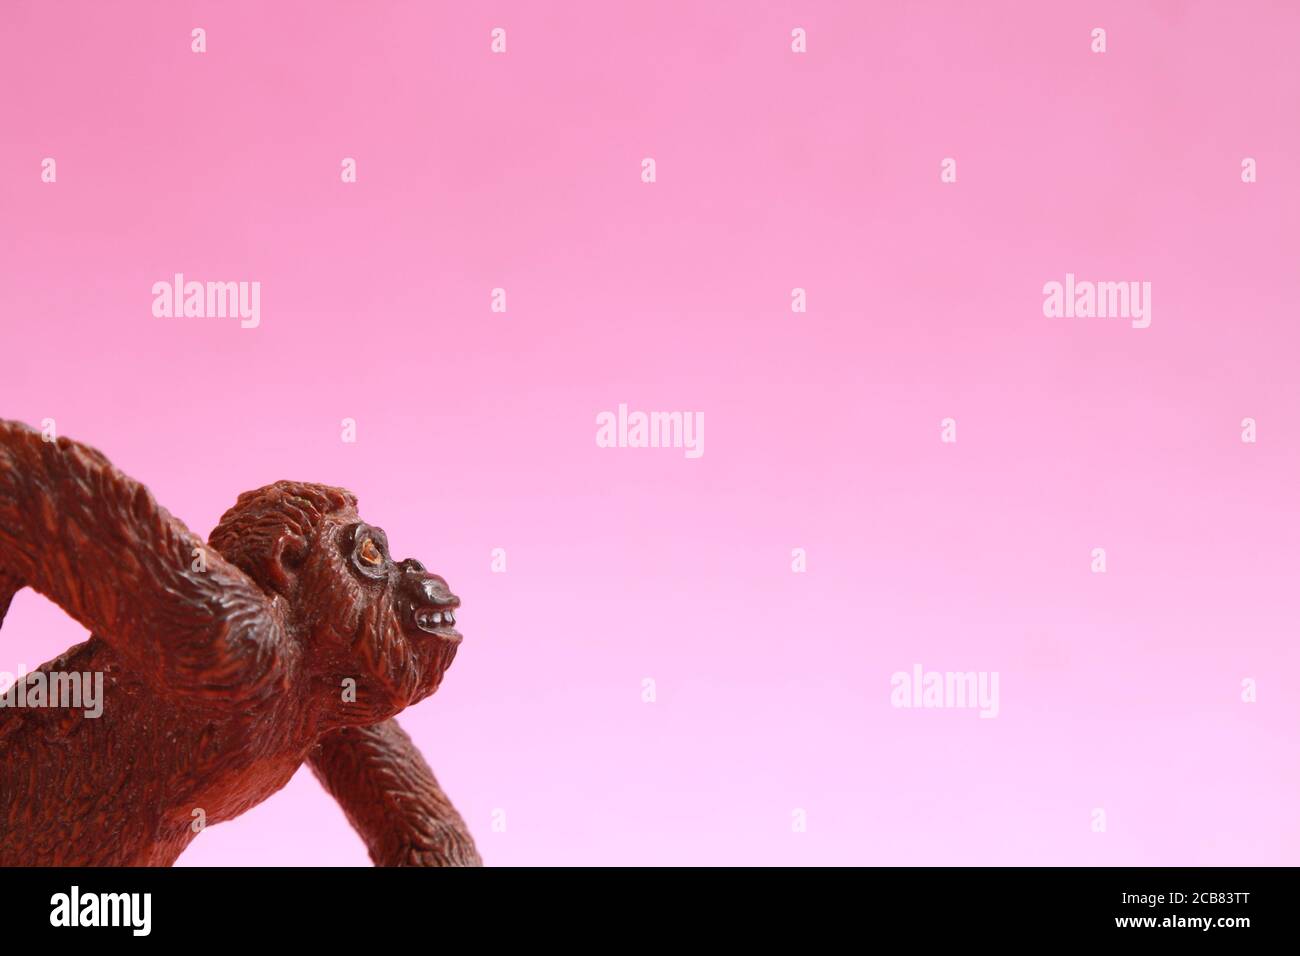 Closeup shot of orangutan shaped plastic toy isolated on a pink background Stock Photo